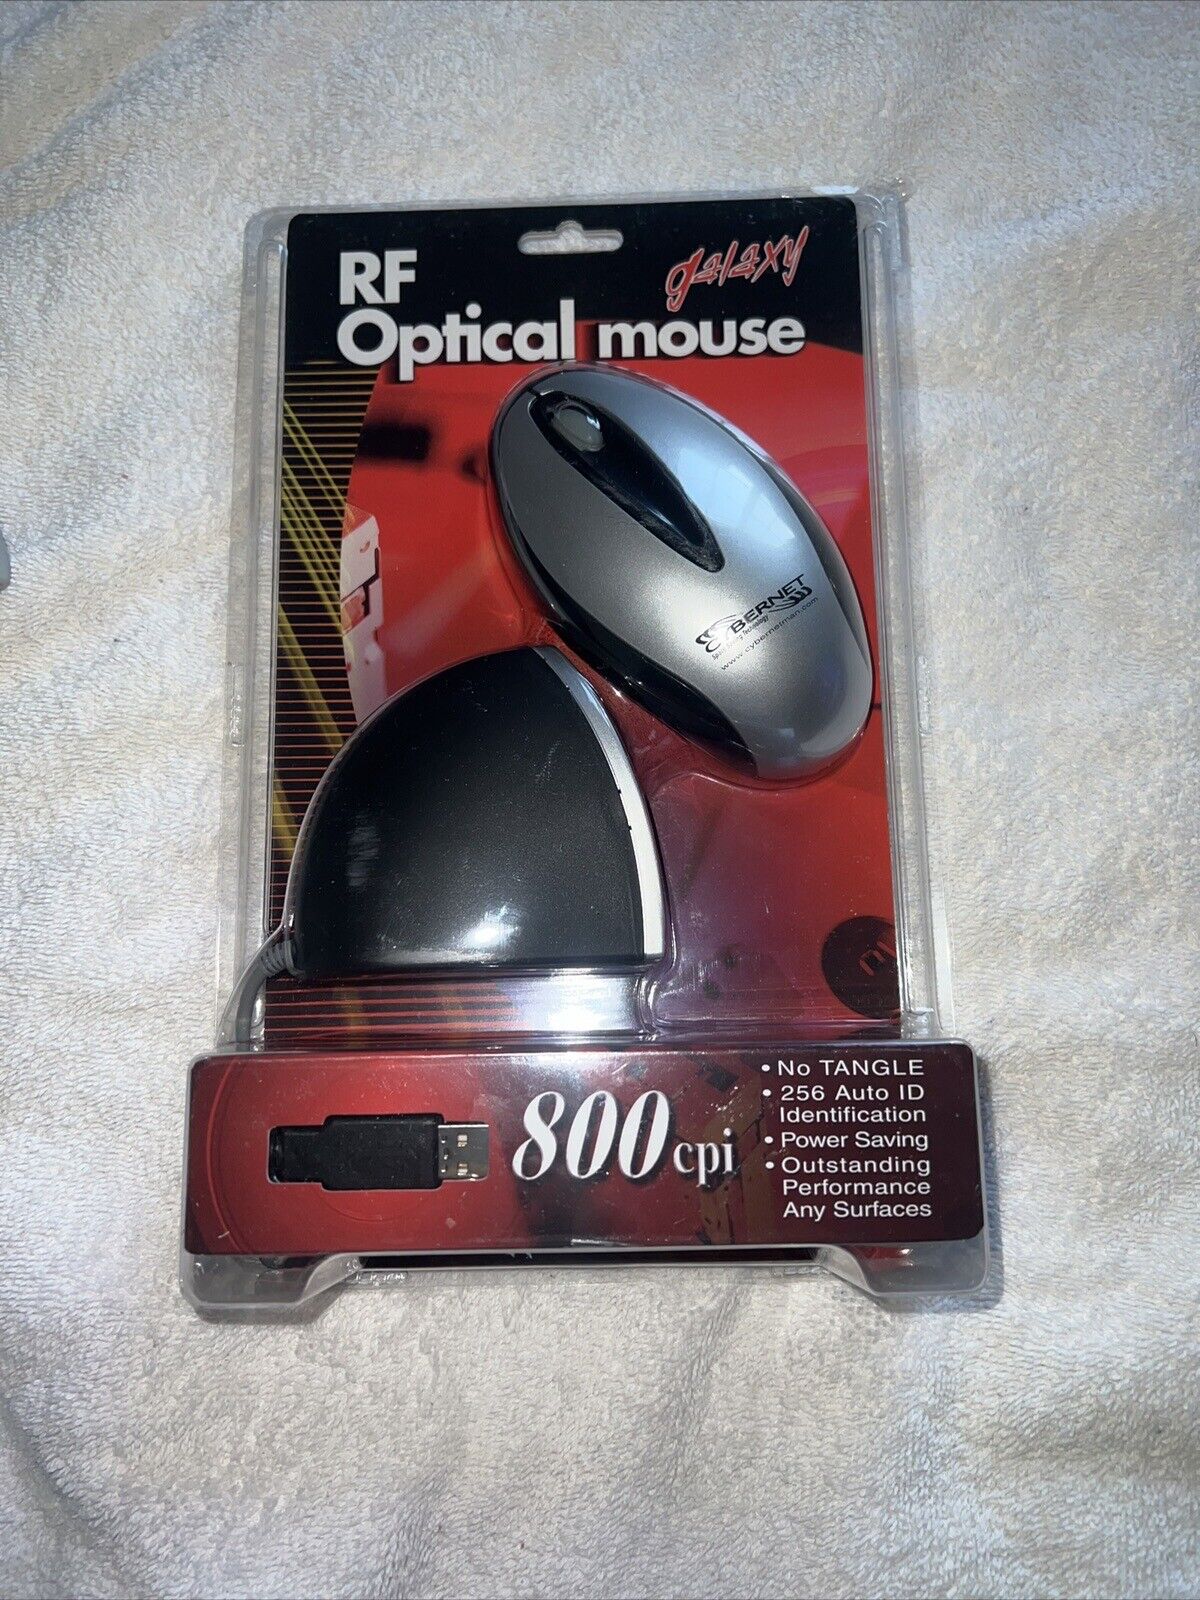 Galaxy RF Optical Wireless Mouse Sealed Retail Package. Color Black & Grey New